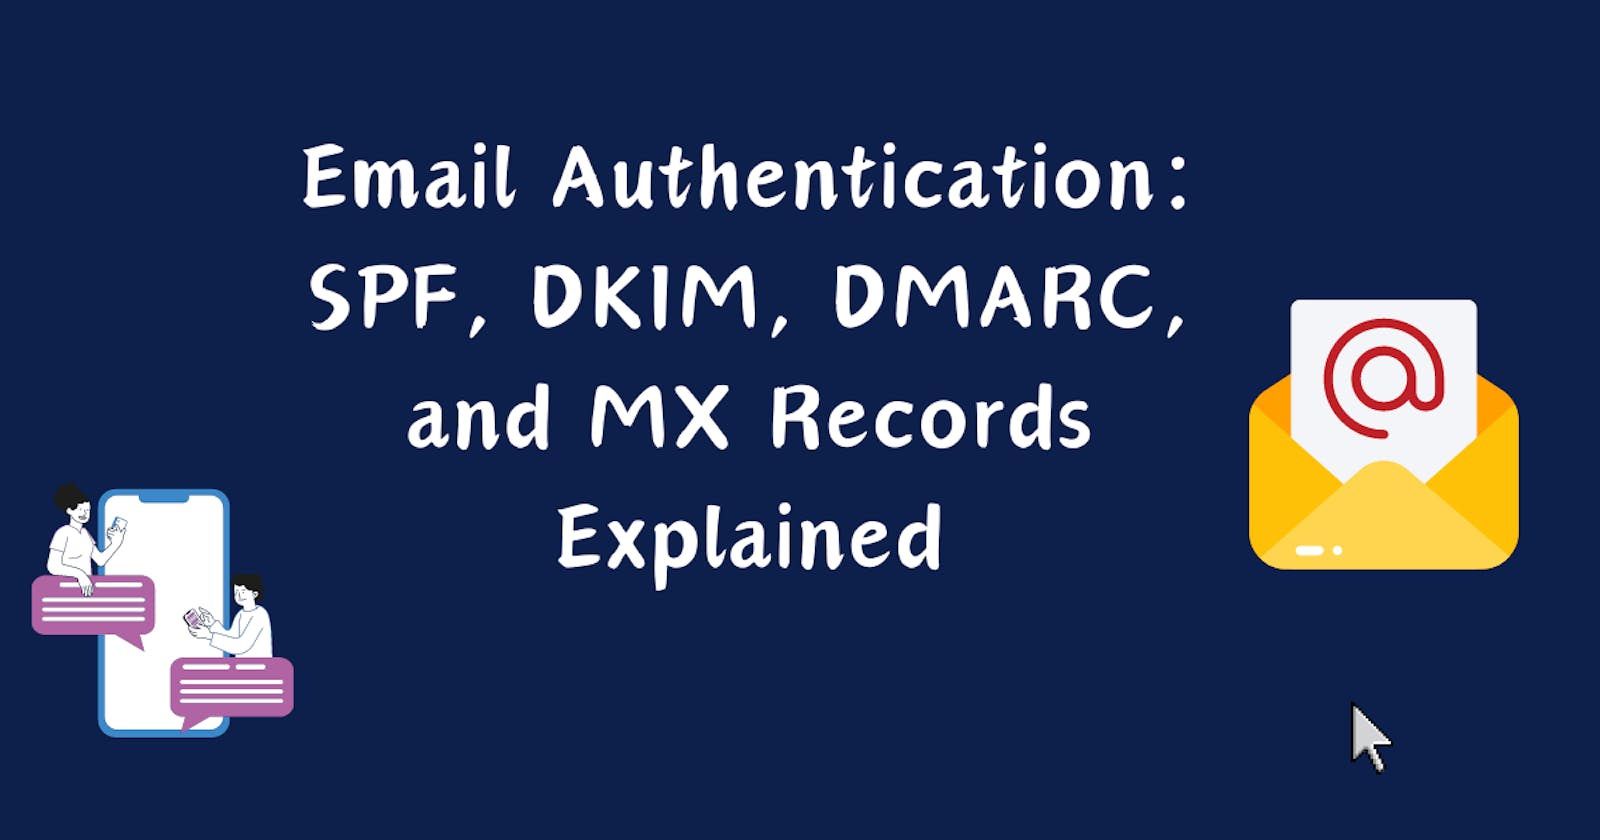 Email Authentication: SPF, DKIM, DMARC, and MX Records Explained